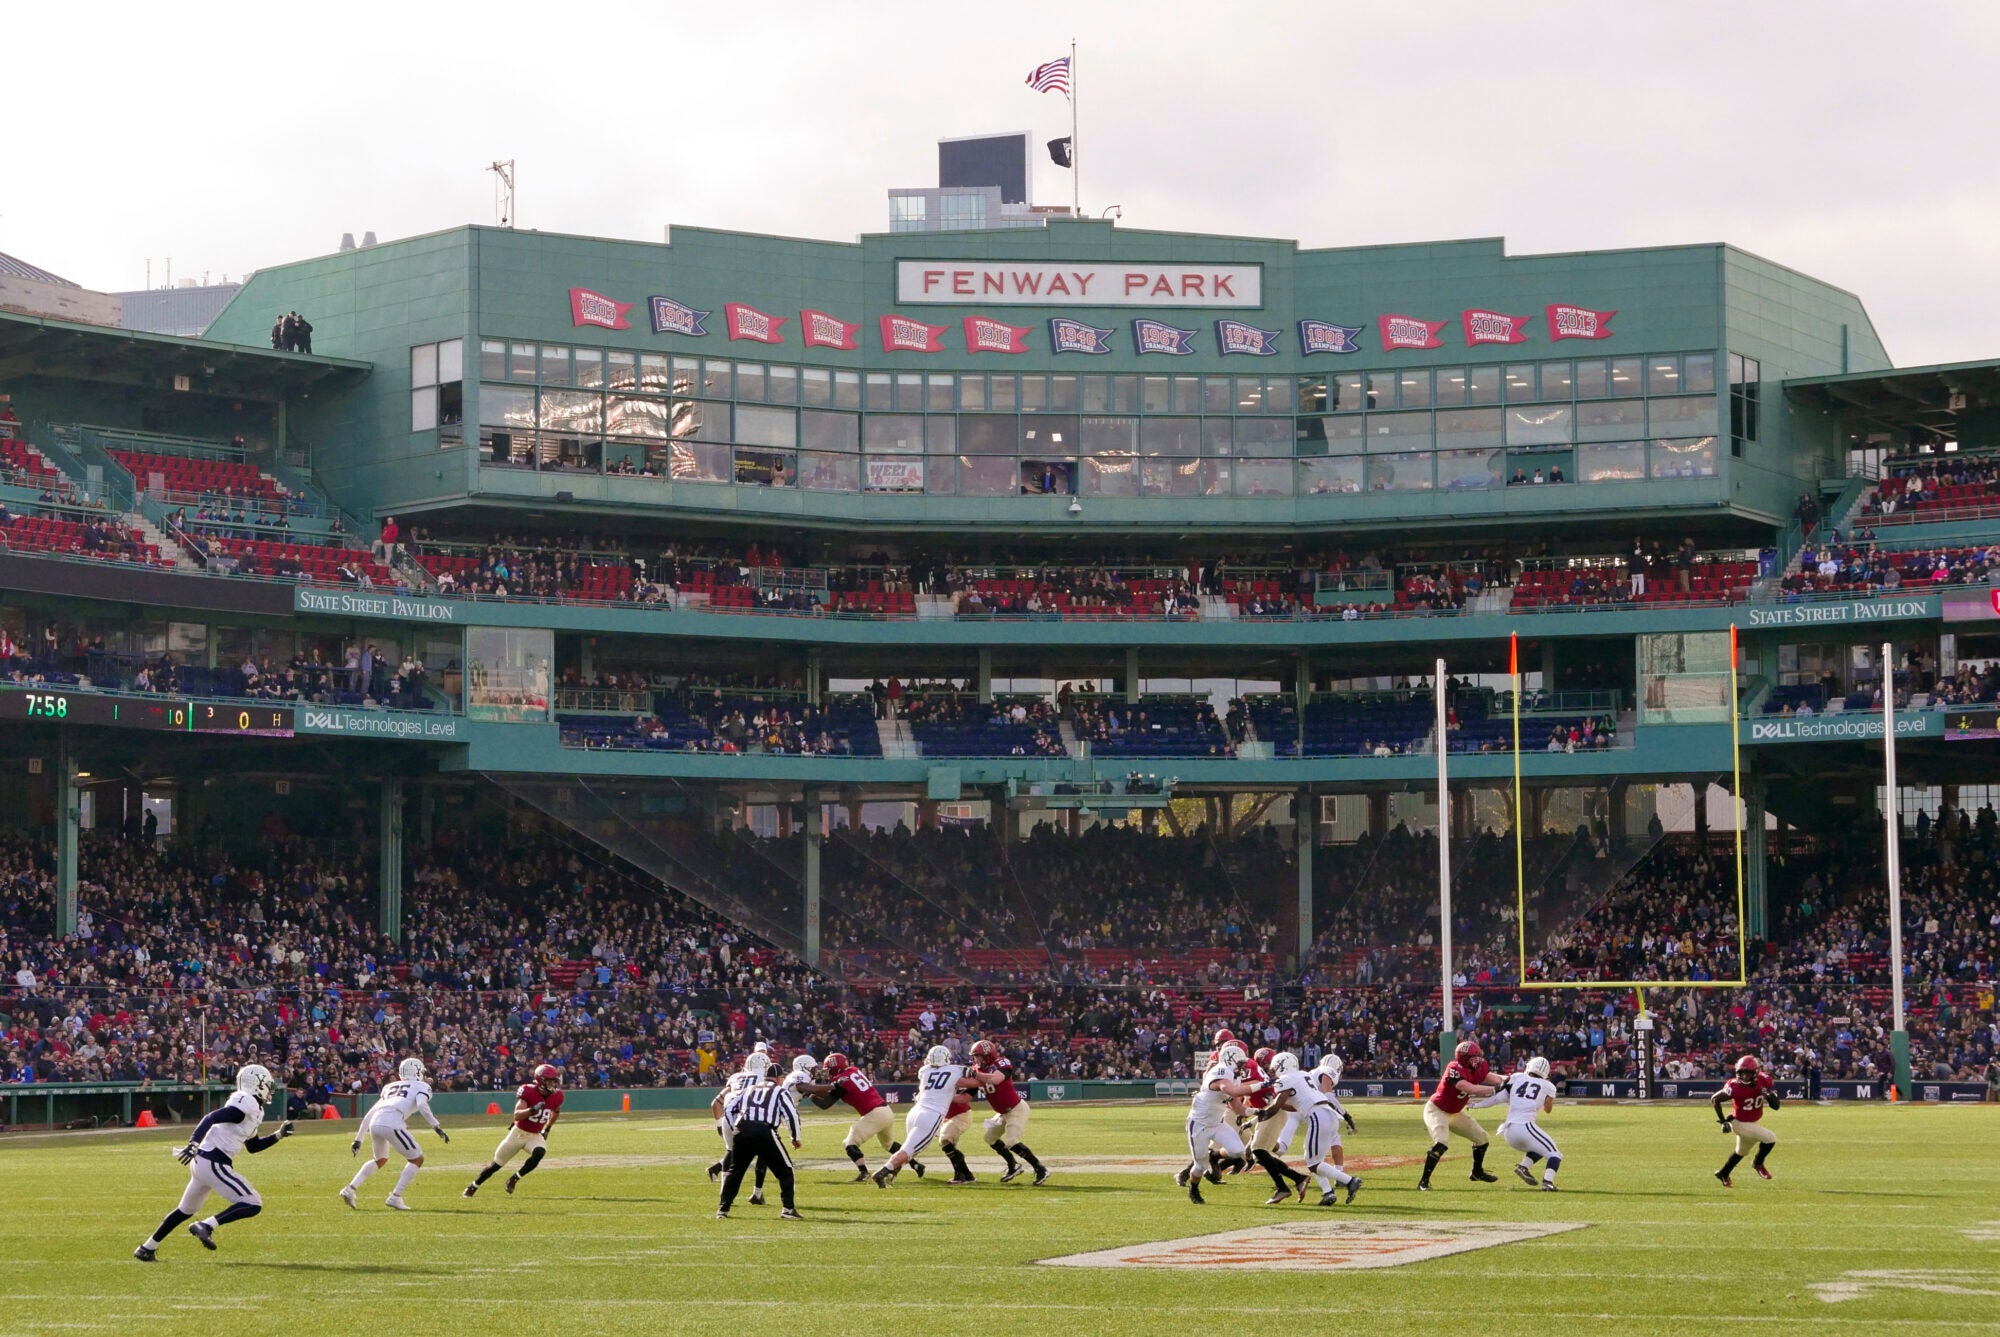 Harvard and Yale football teams playing in front of the large, green Fenway Park sign in the stadium.